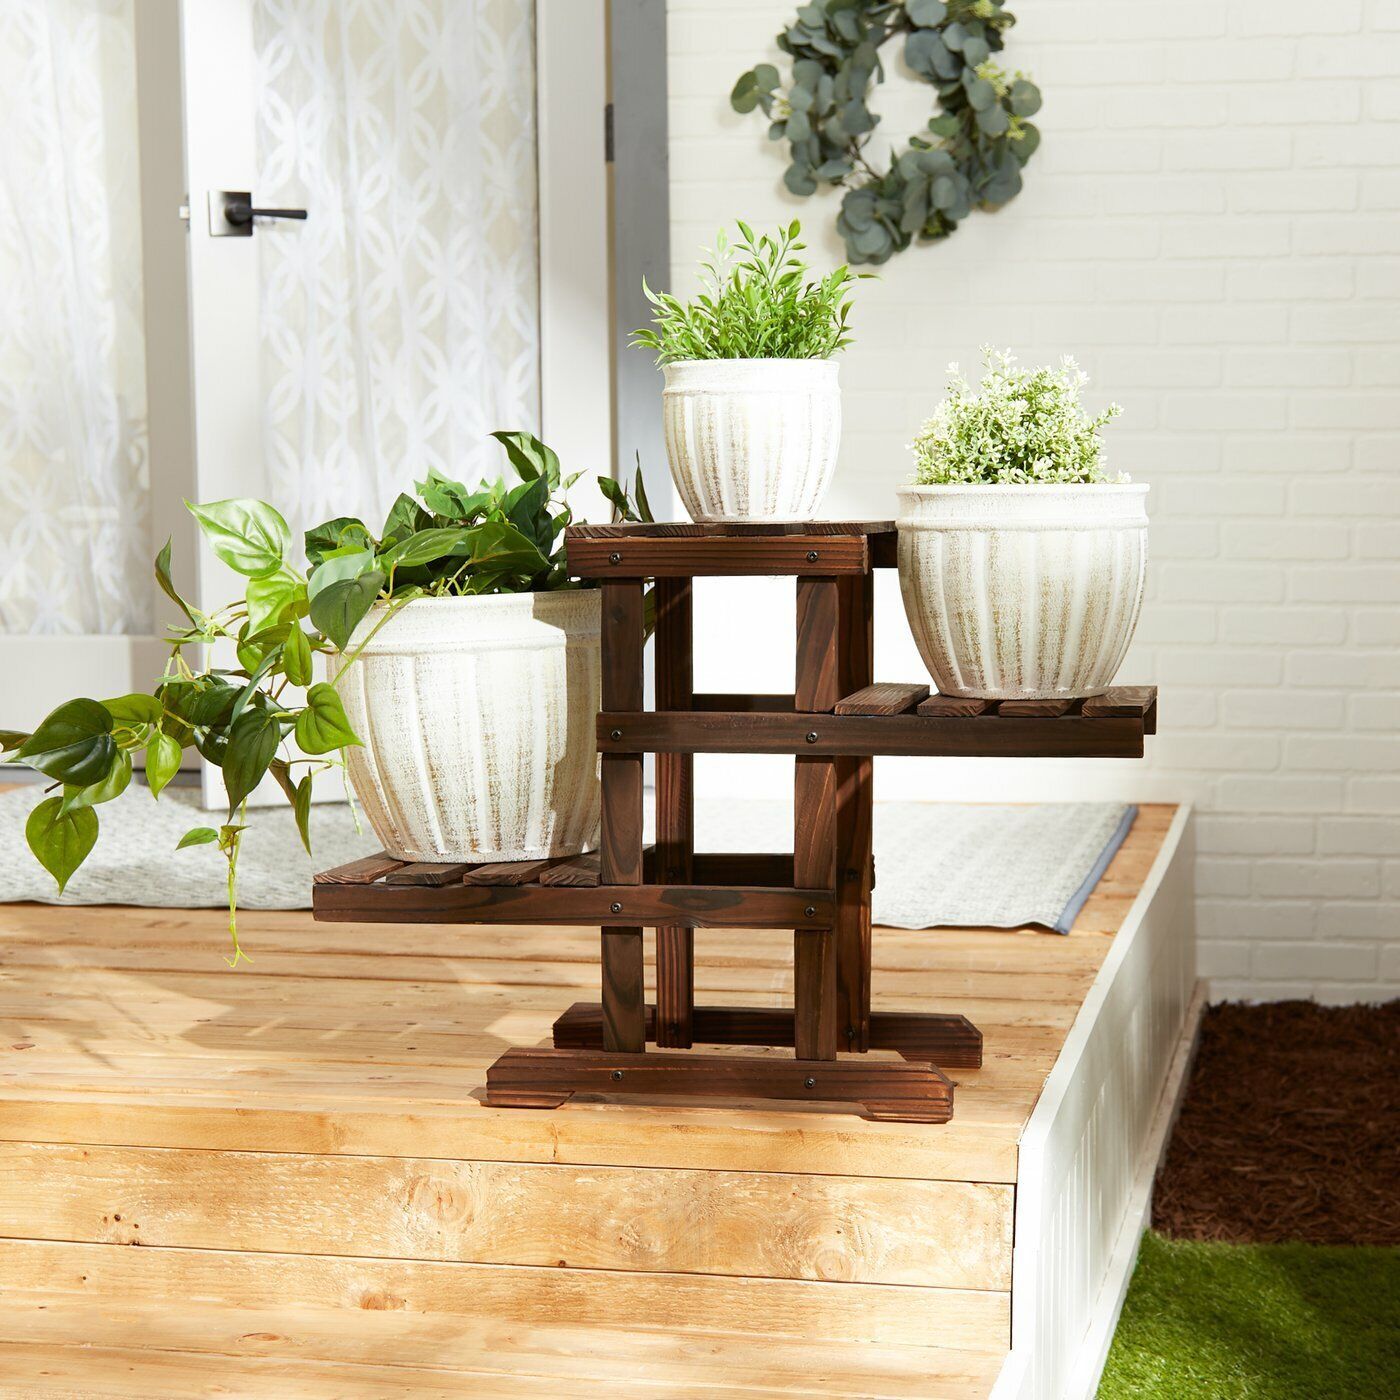 Rustic Farm House Style Indoor Outdoor Garden Planter Plant Stand With 3  Shelf | Ebay Pertaining To Rustic Plant Stands (View 15 of 15)